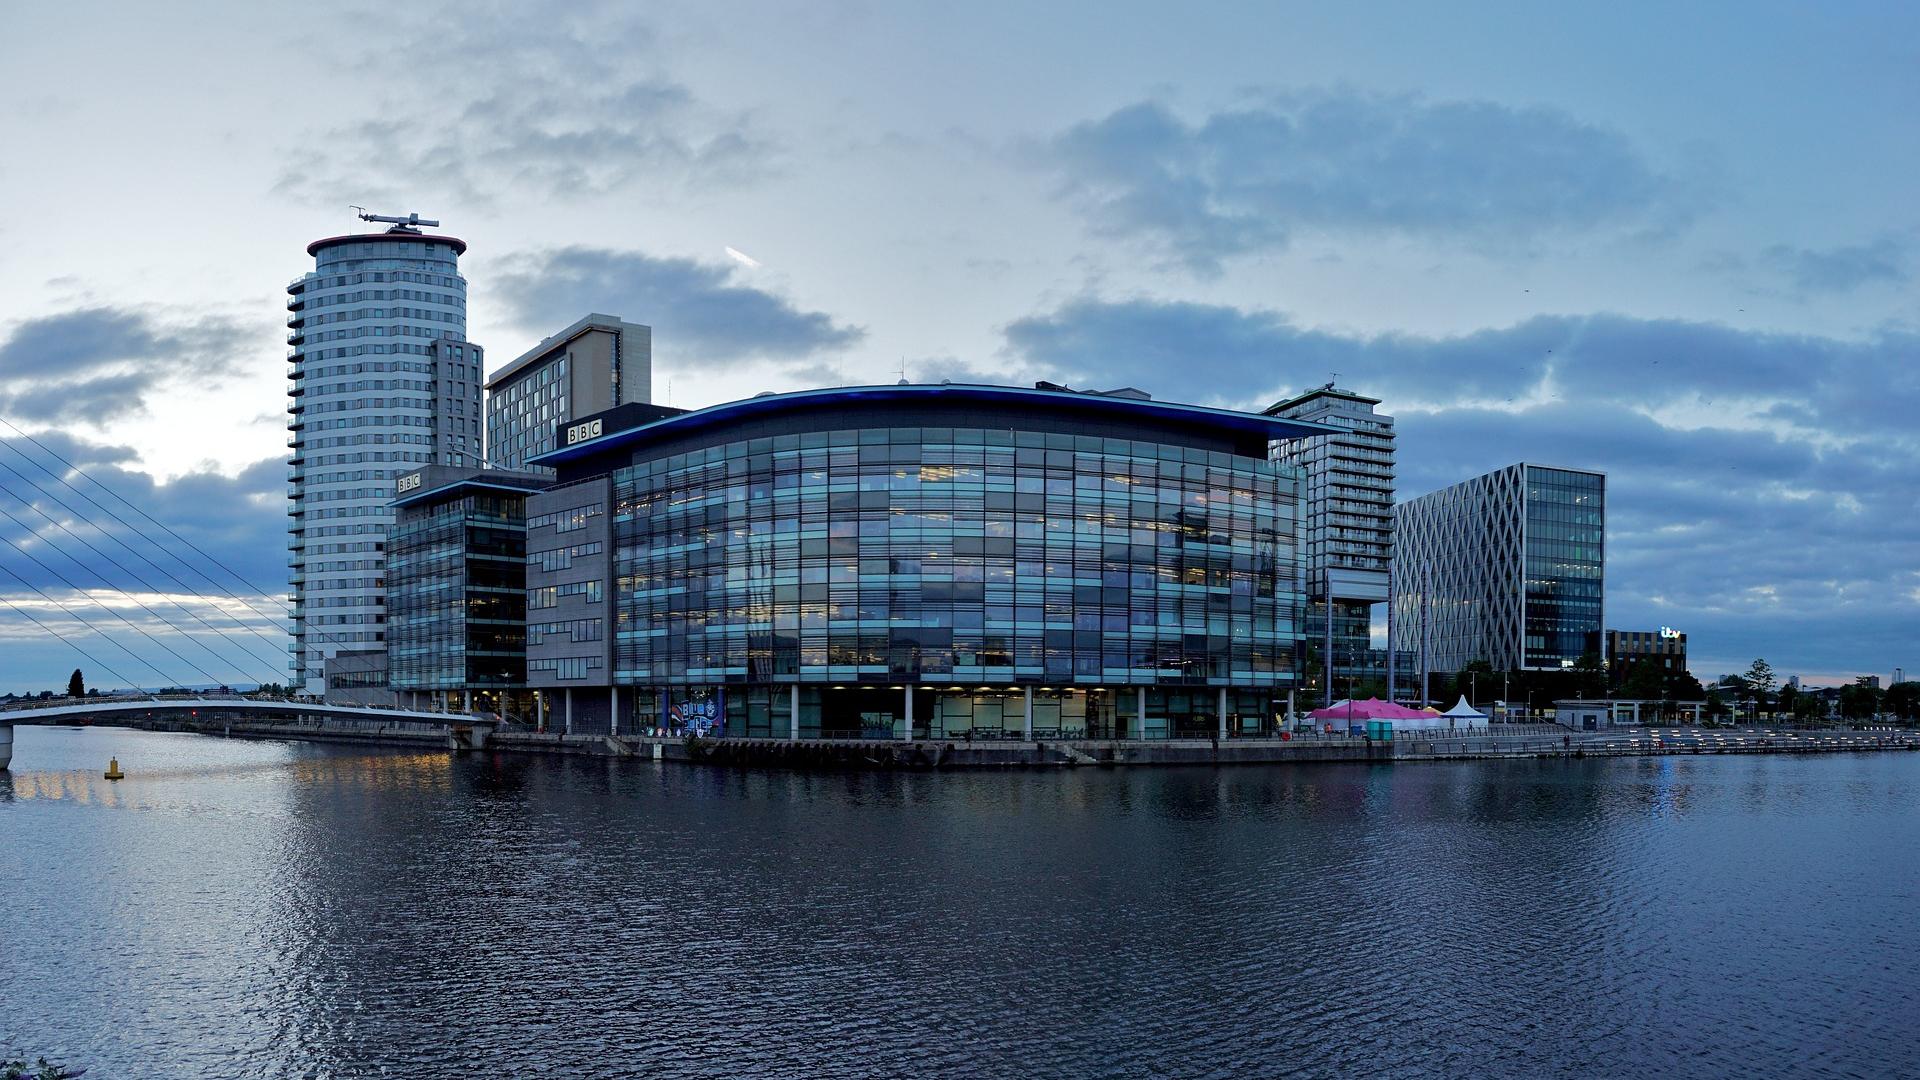 View of modern buildings across a stretch of water, Manchester